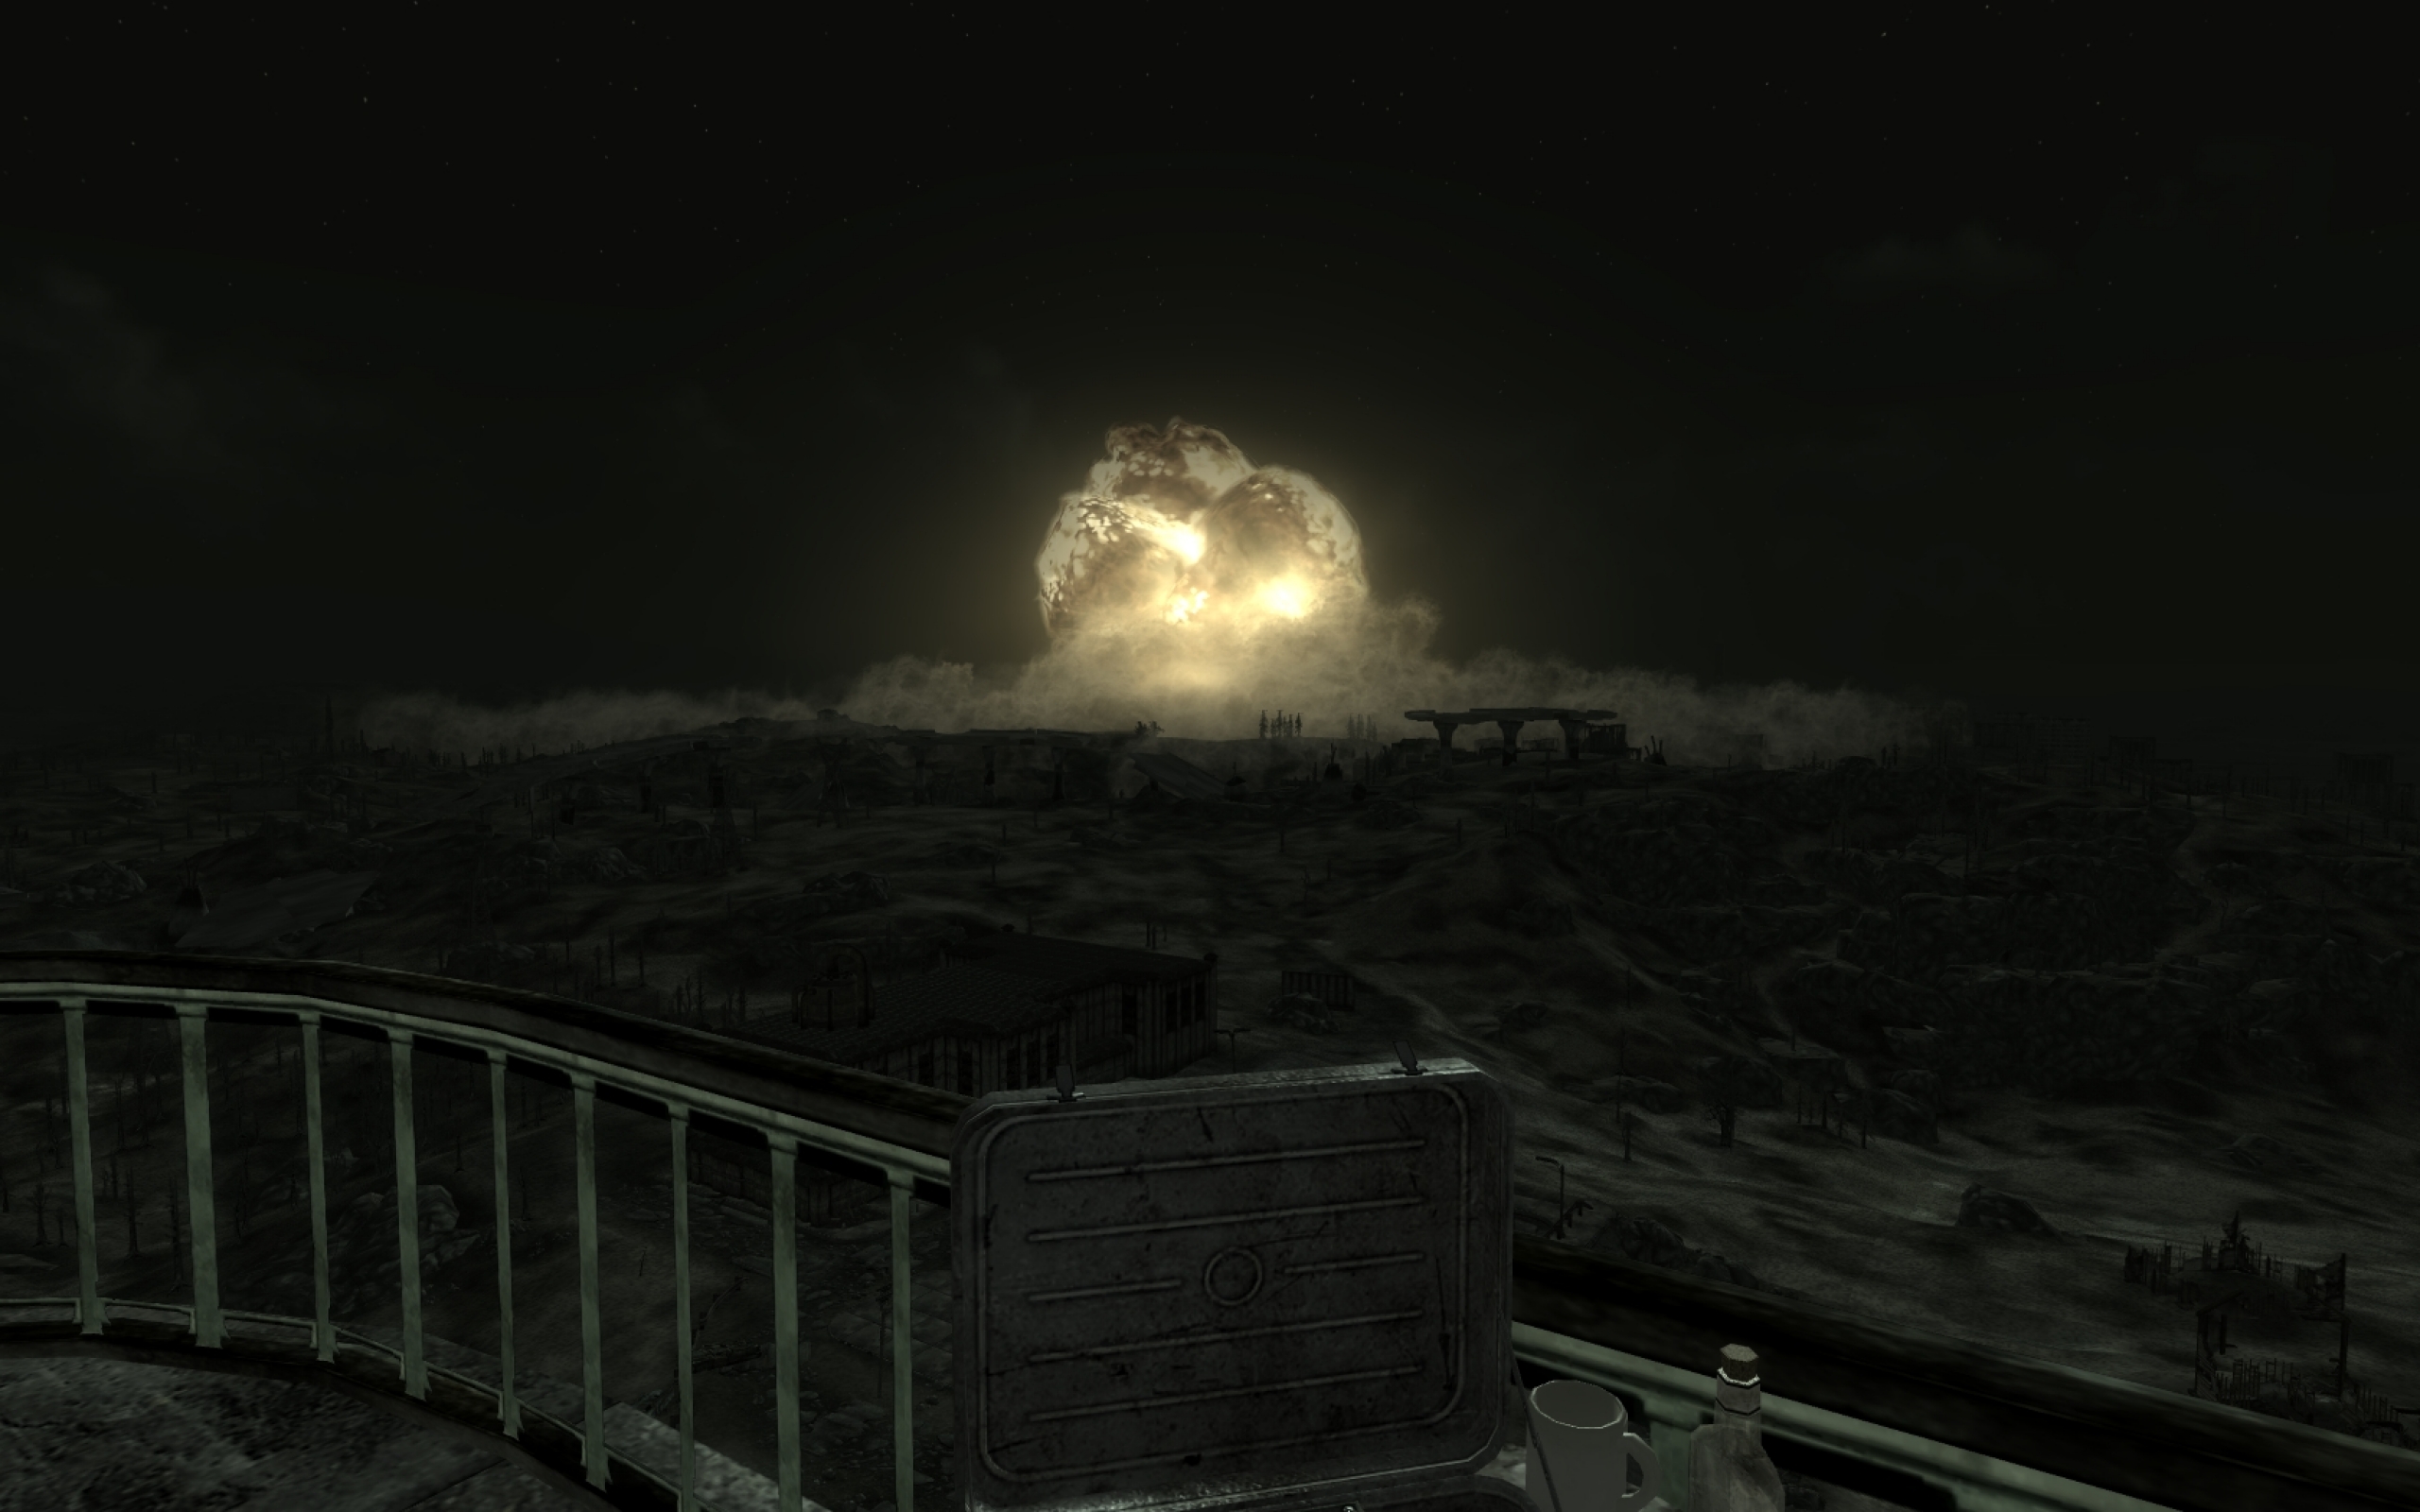  nuclear explosions atomic bomb 1680x1050 wallp Wallpaper download 2560x1600